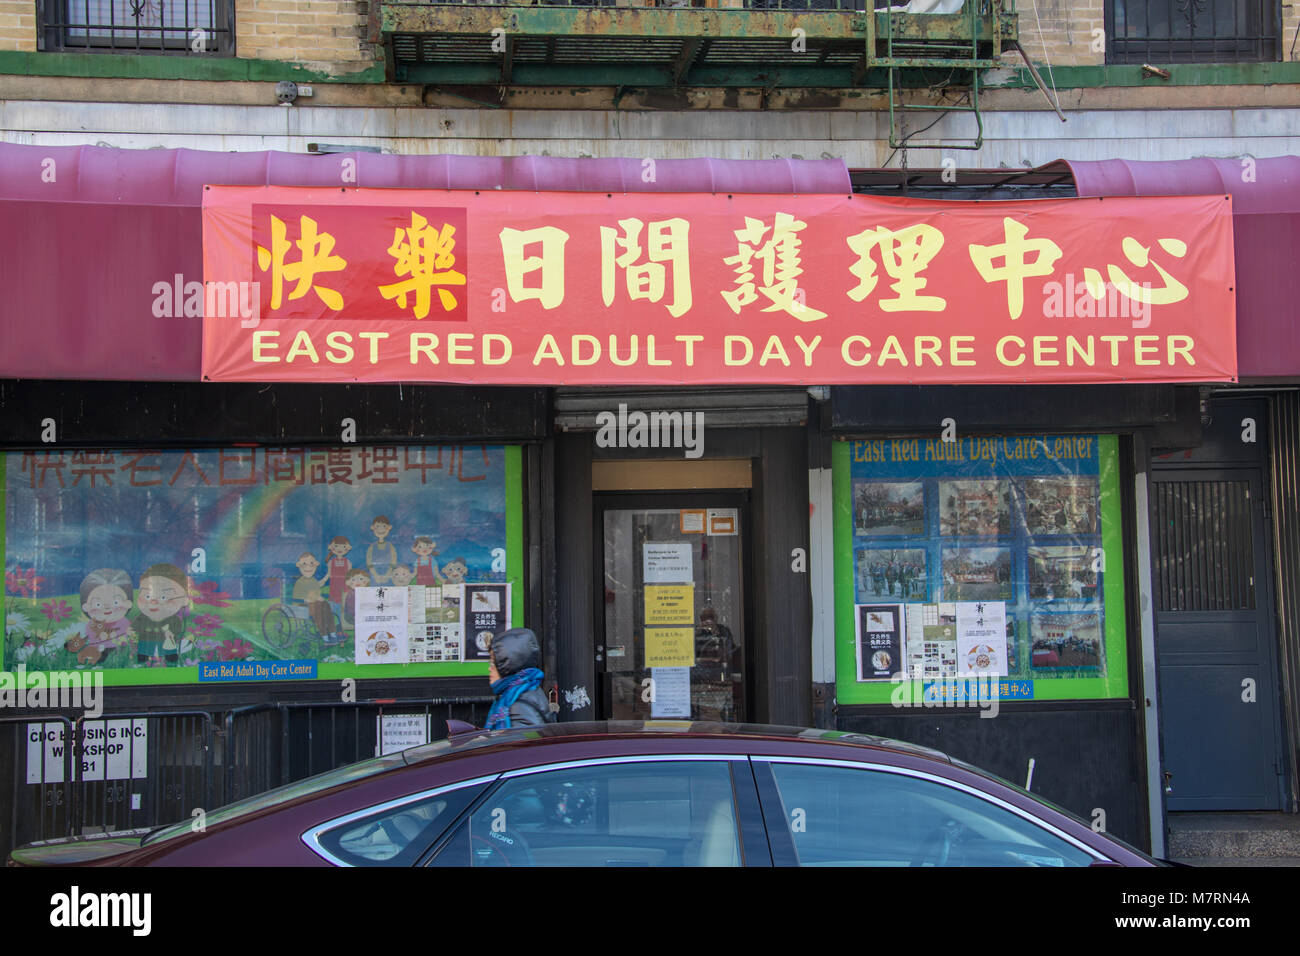 East Red Adult Day Care Center, Chinatown, Manhattan, New York City, USA Stock Photo